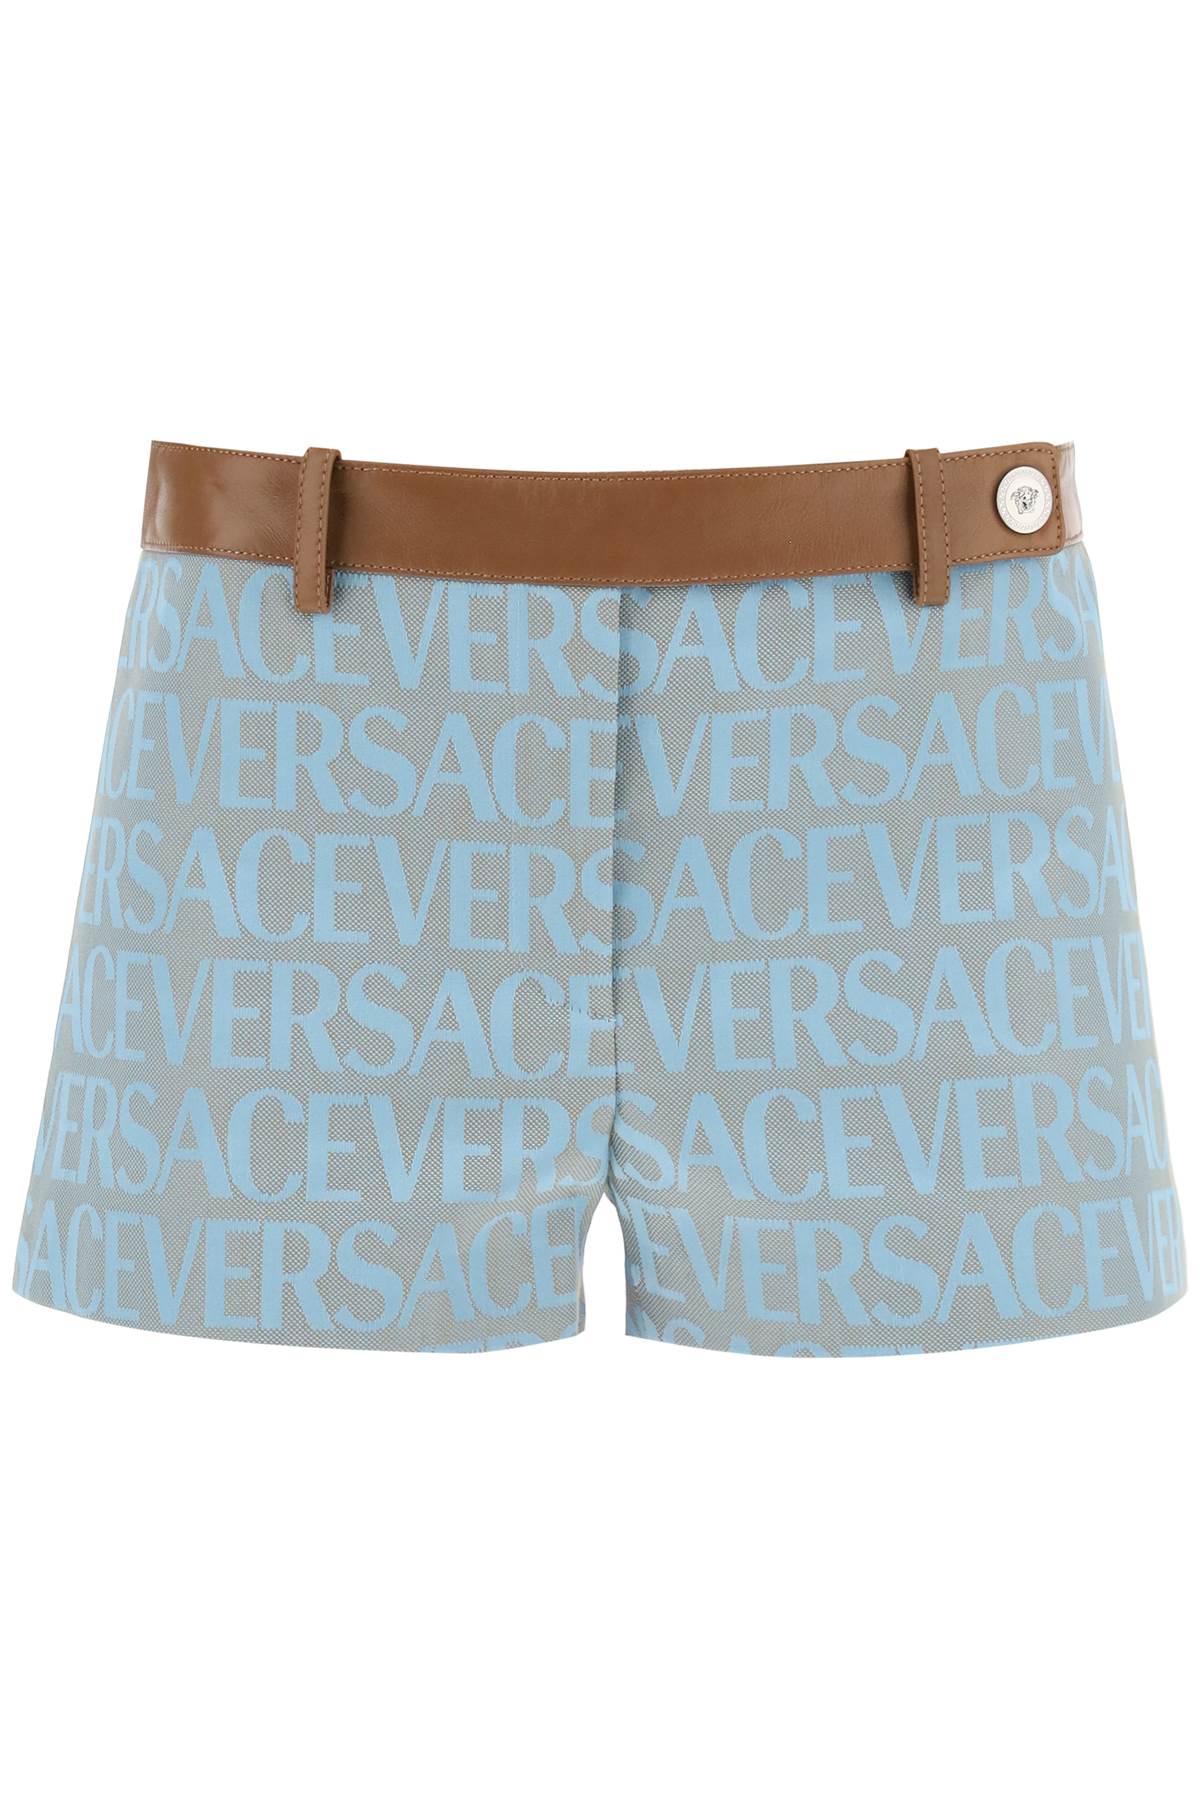 Versace monogram shorts with leather band 1010888 1A08206 PALE BLUE BEIGE